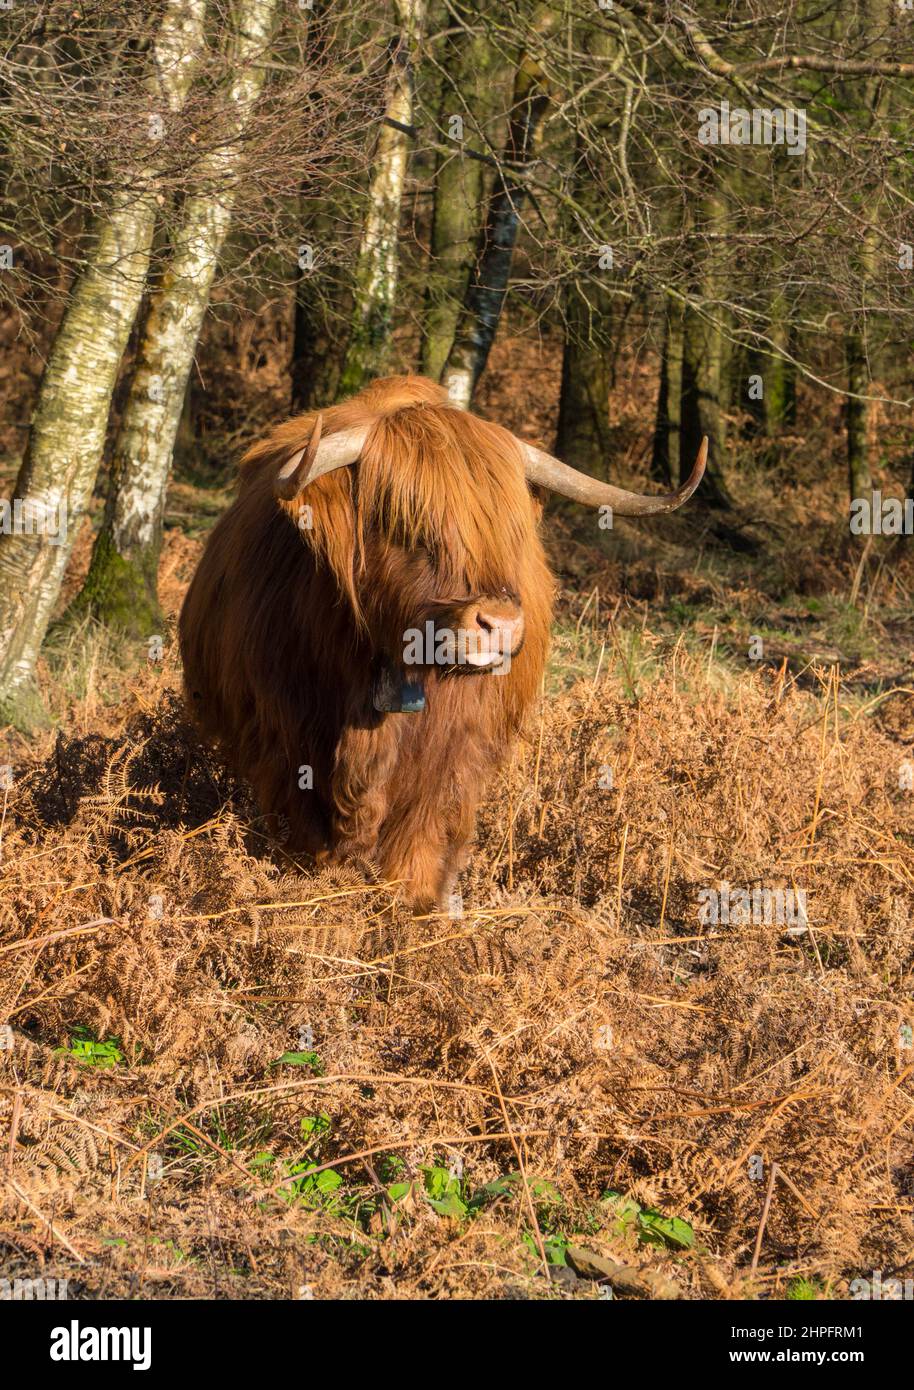 Highland cattle used for grazing in the Forest of Dean Gloucestershire England UK. January 2022. Stock Photo